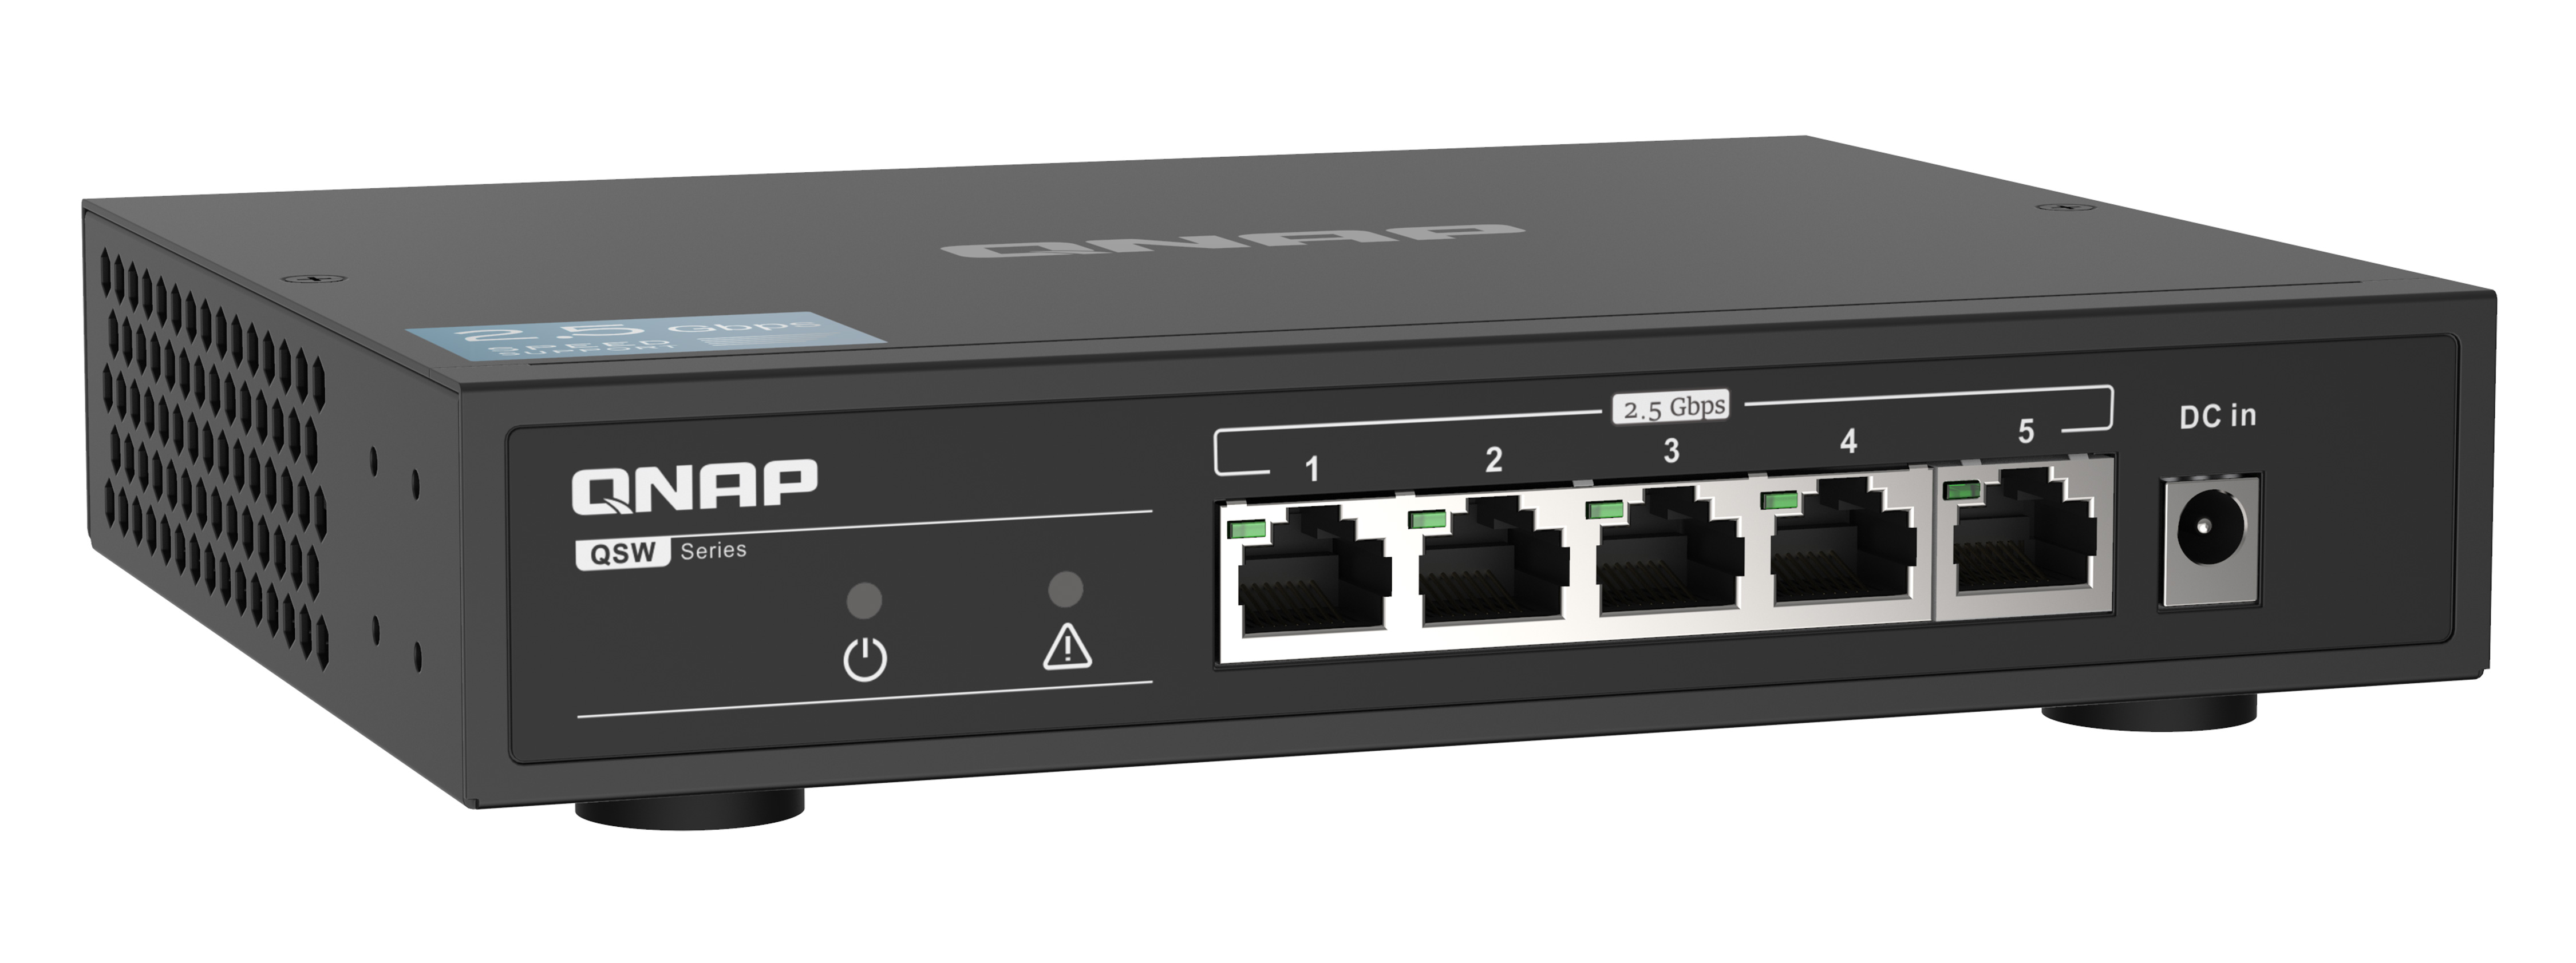 At Last, a 2.5Gbps Consumer Network Switch: QNAP Releases QSW-1105-5T  5-Port Switch